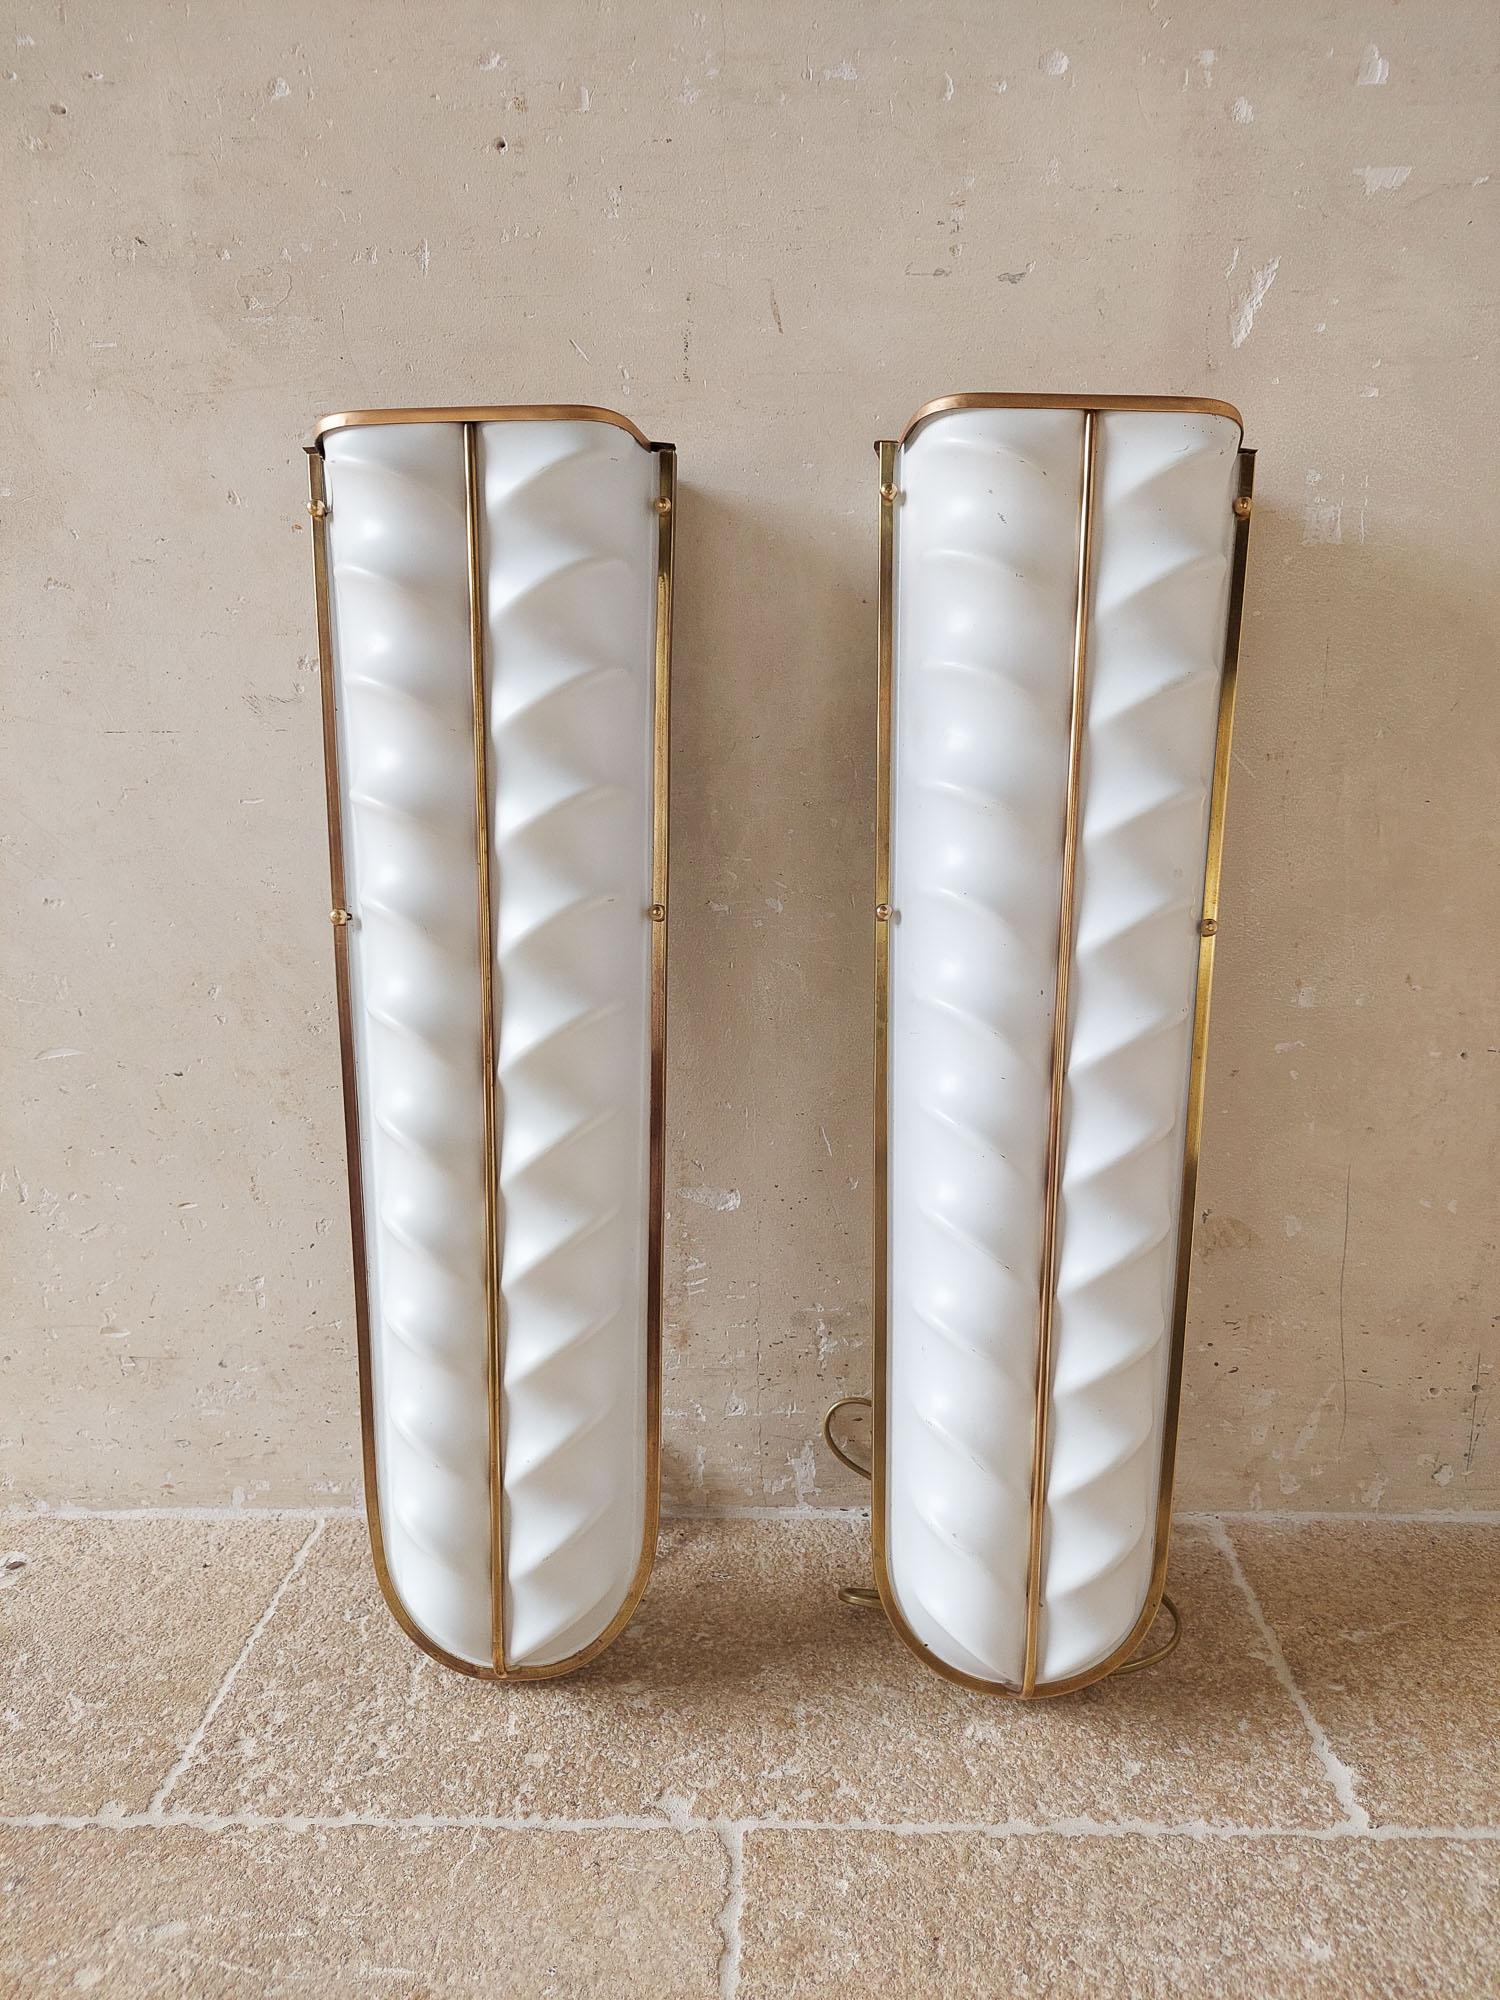 Pair of 1950s cinema or theater wall lamps, sconces made of brass and celluloid. Unique vintage wall lights in Art Deco meets Rockabilly style.

h 69 x w 21 x d 12 cm